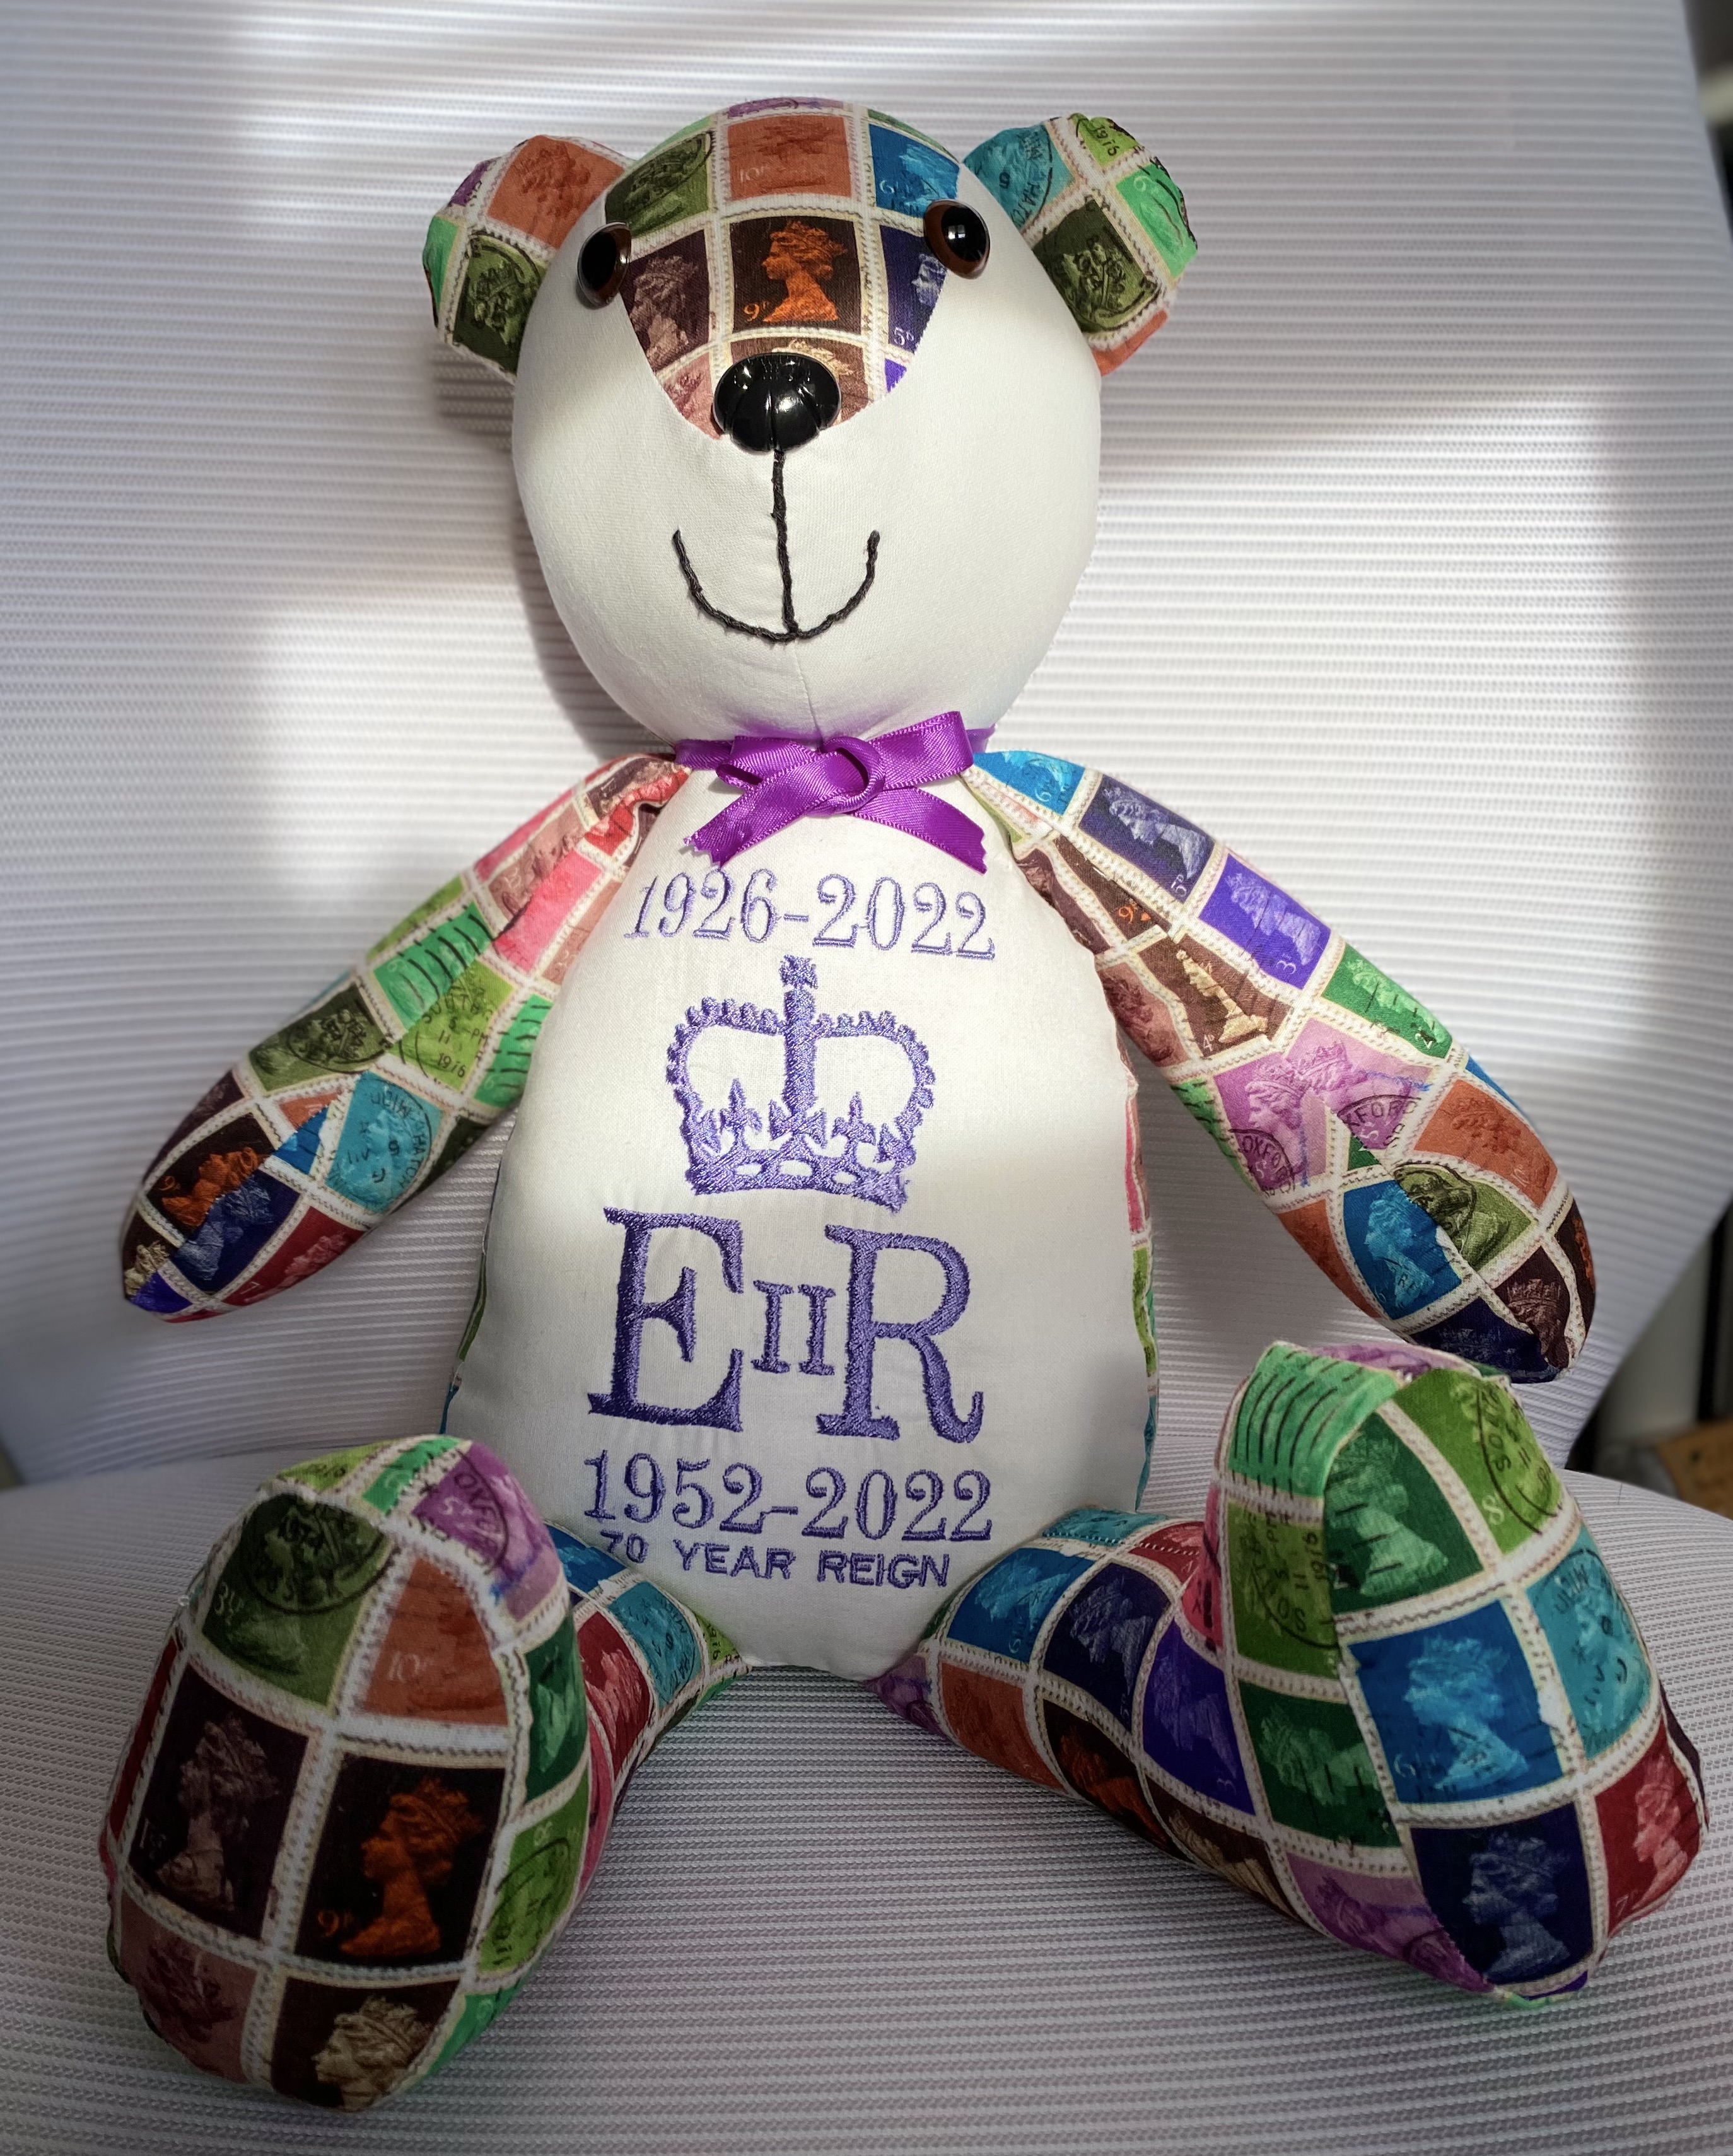 The memory bear depicting the Queen's cipher and details of her reign on the bear's front 